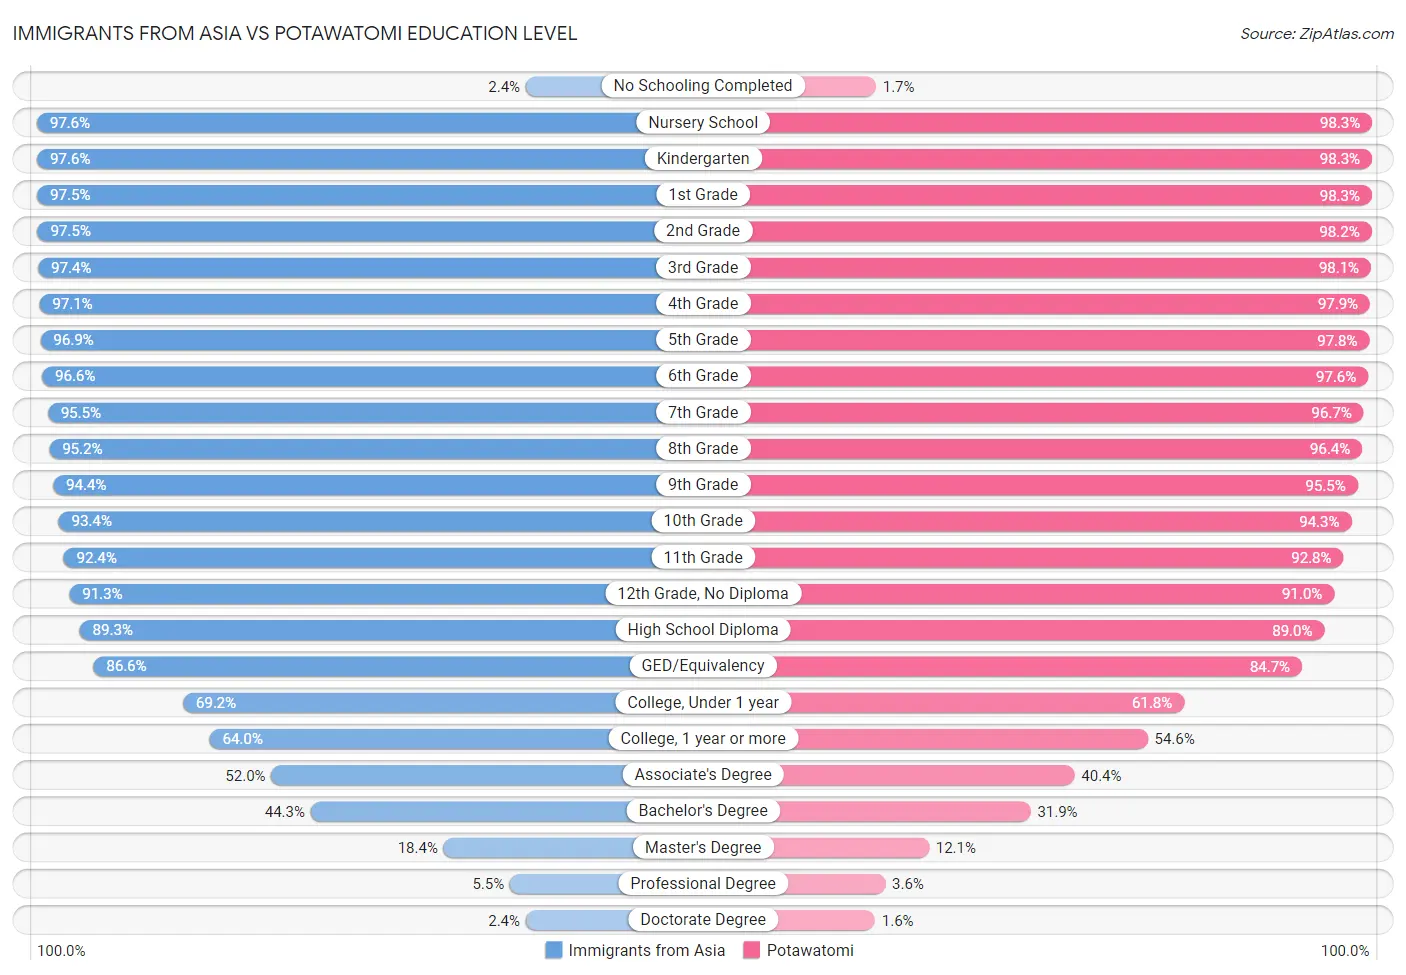 Immigrants from Asia vs Potawatomi Education Level